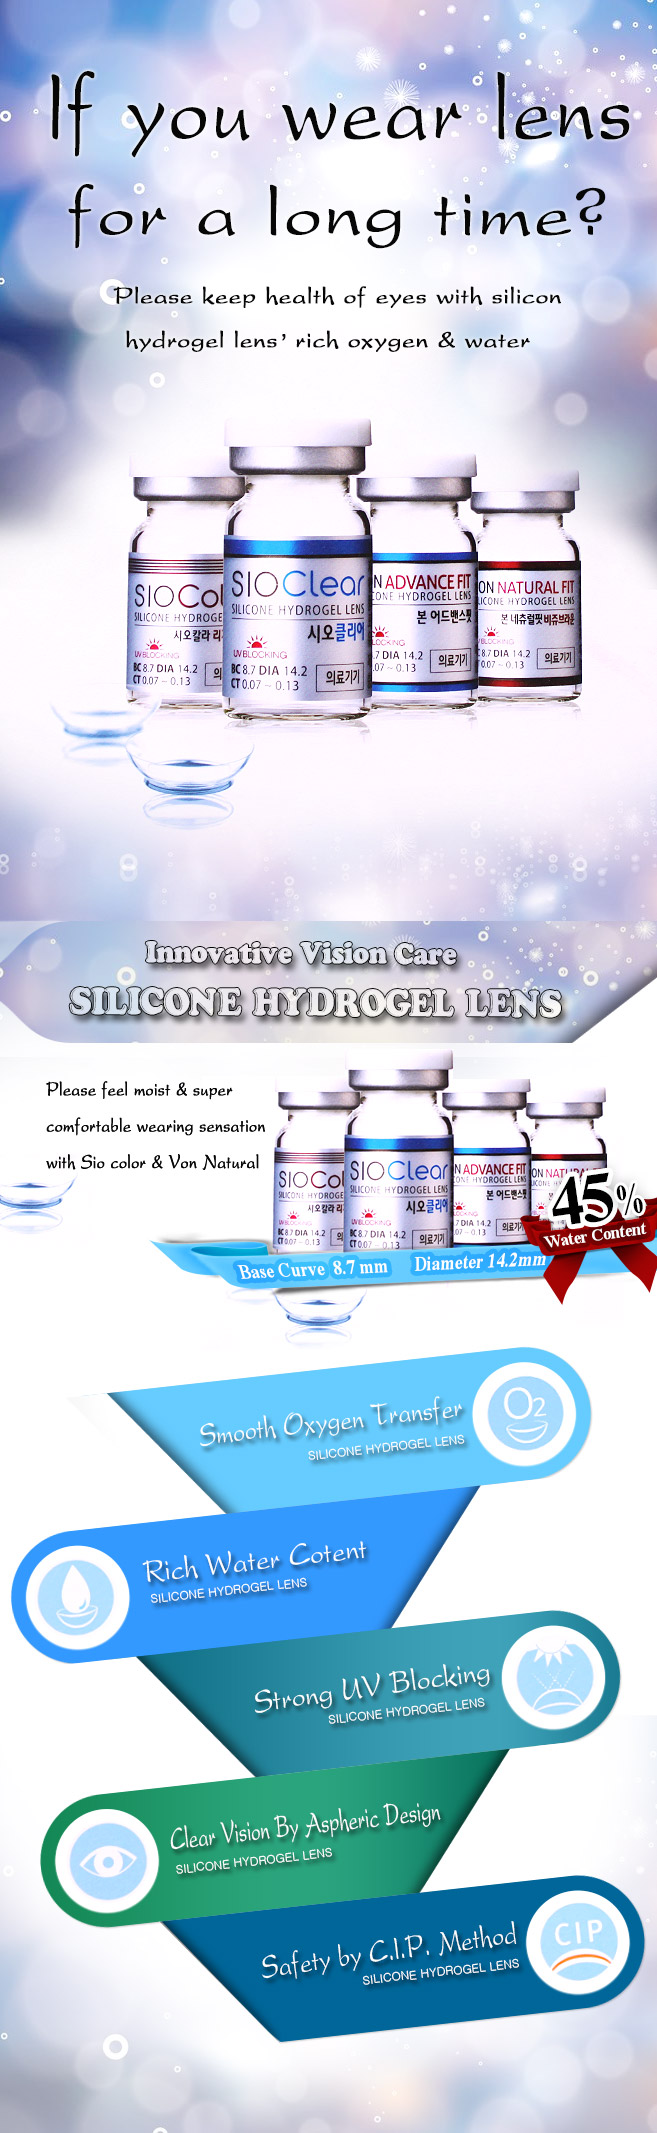 The description image of What is Silicone Hydrogel?